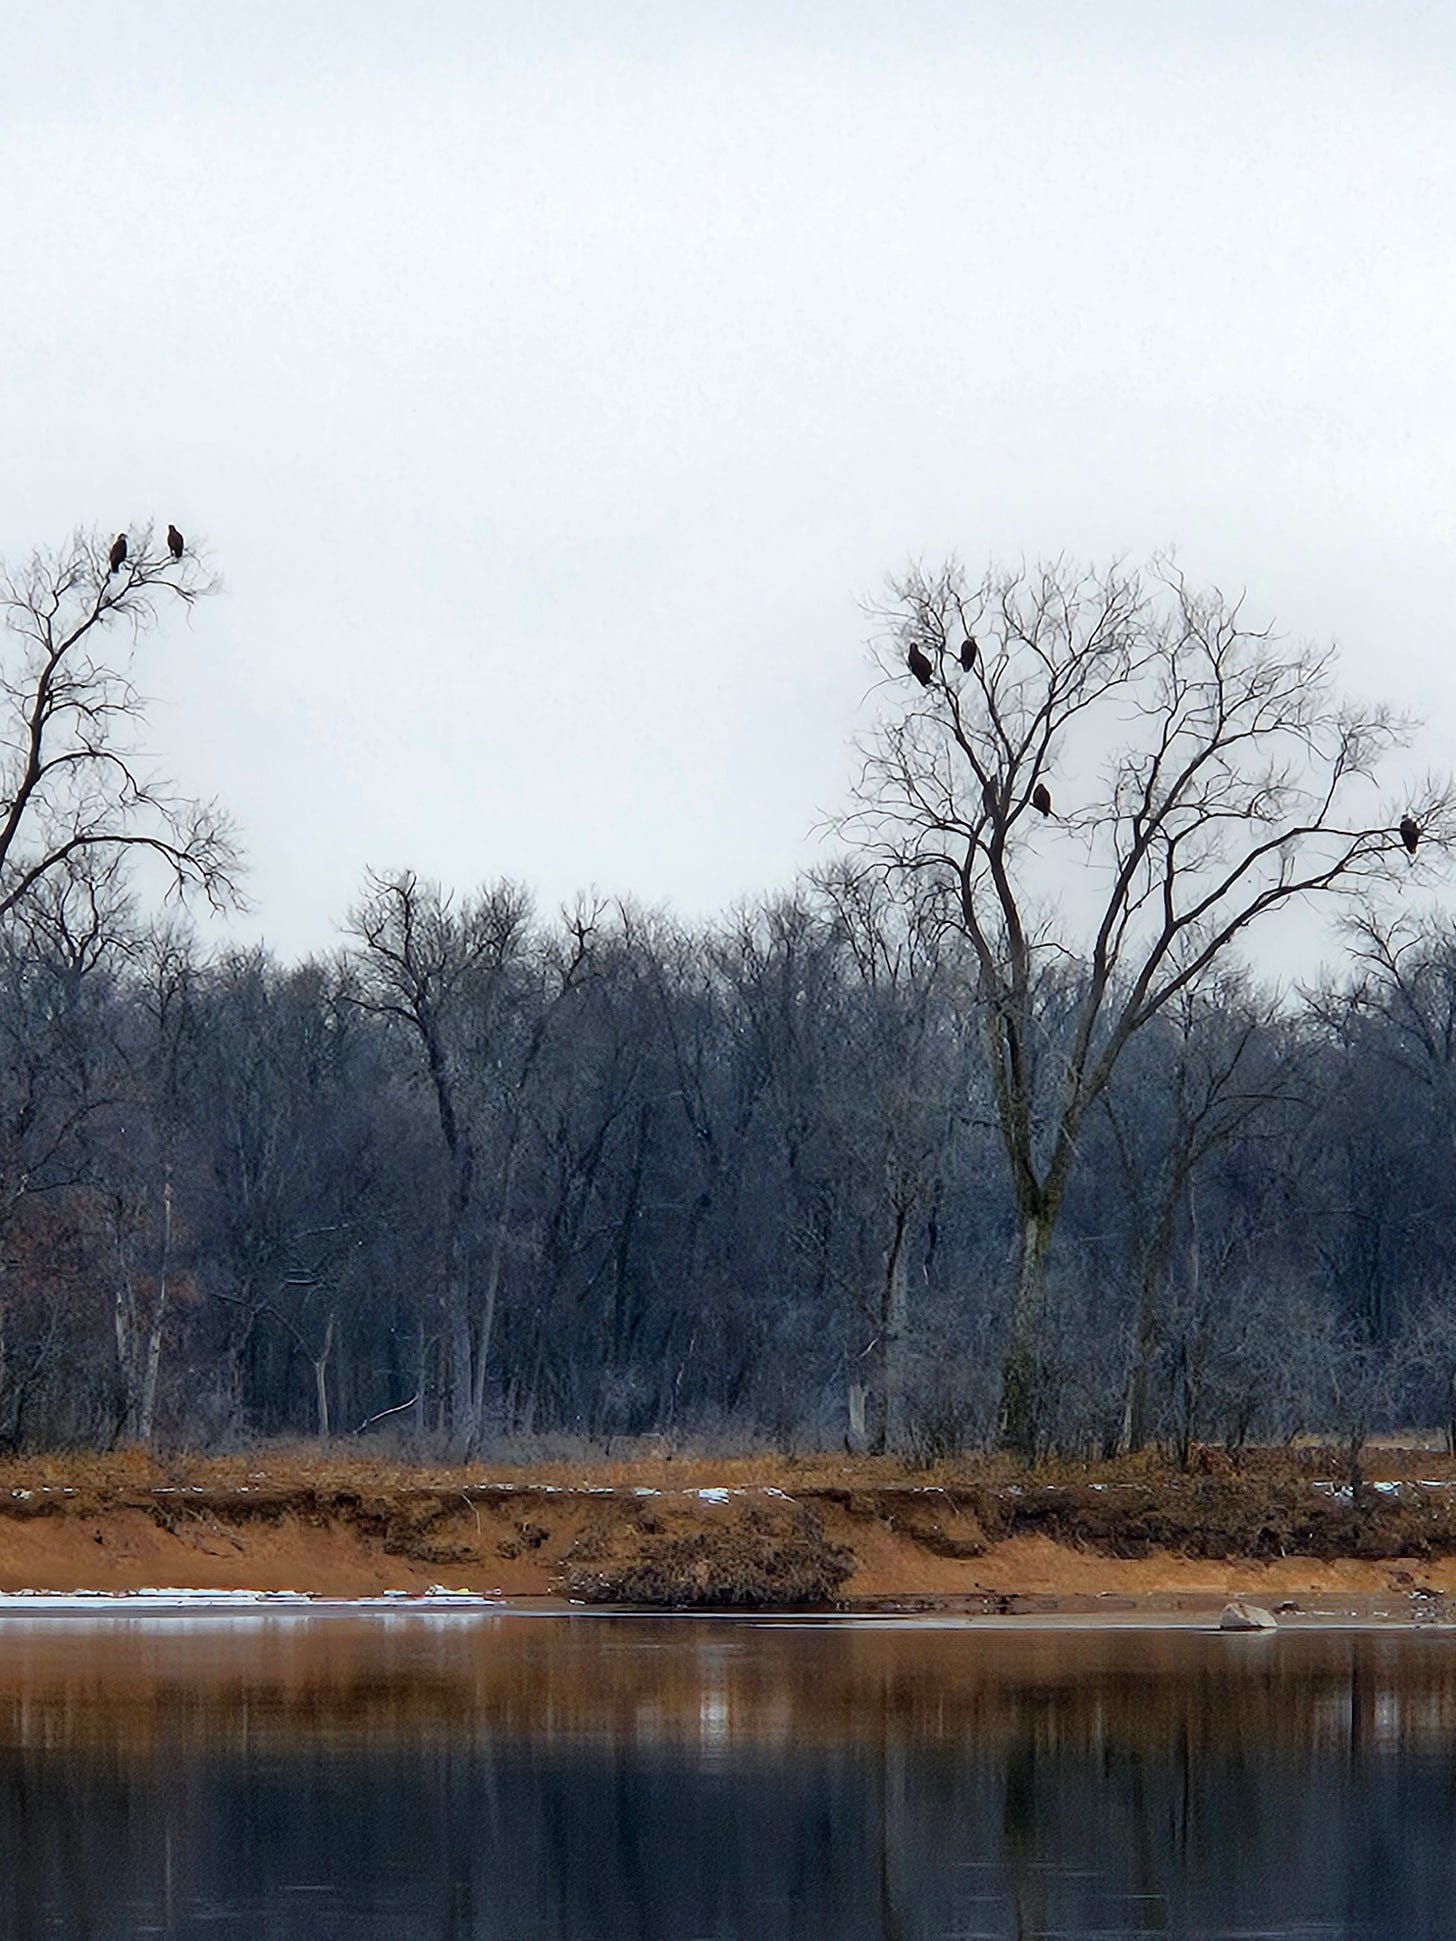 Several large bald eagles sit perched in tall, bare-branched trees along a sandy shoreline, with the river flowing by beneath.